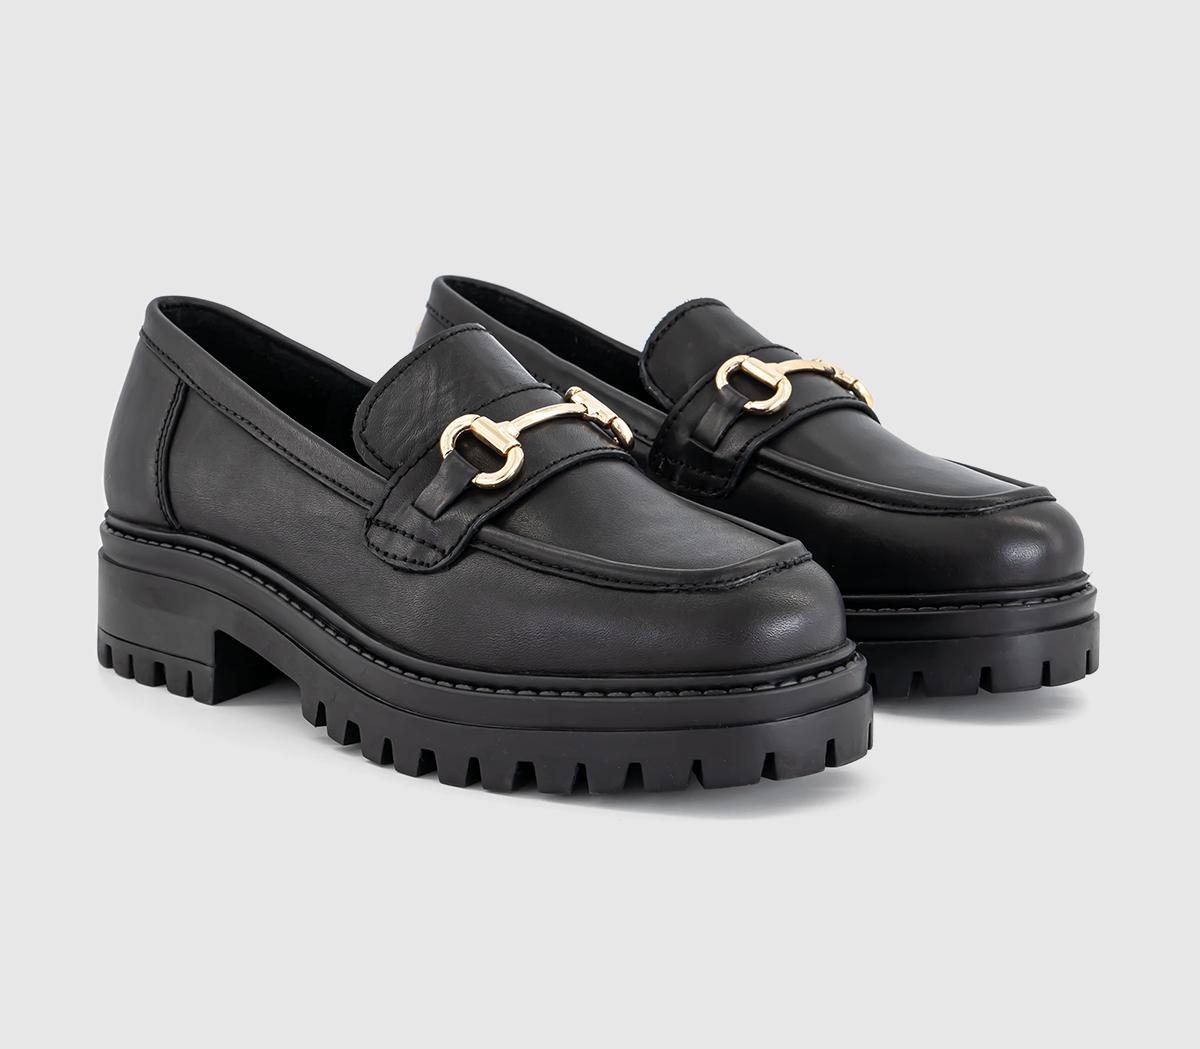 OFFICE Womens Fairhope Chunky Snaffle Trim Loafers Black Leather, 7